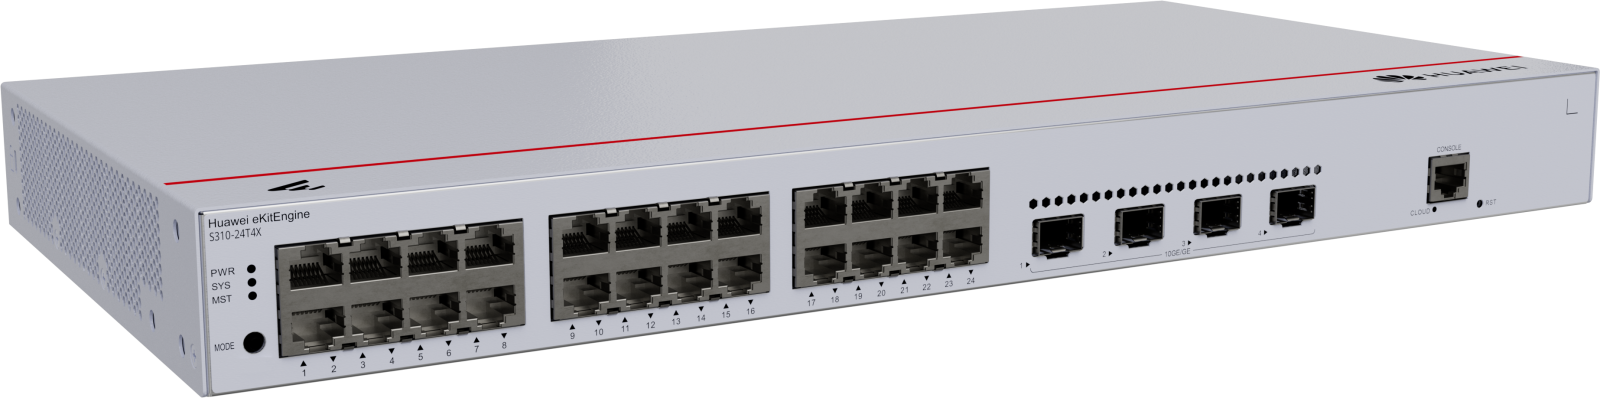 Levně Huawei S310-24T4X Switch (S310-24T4X (24*10/100/1000BASE-T ports, 4*10GE SFP+ ports, built-in AC power)